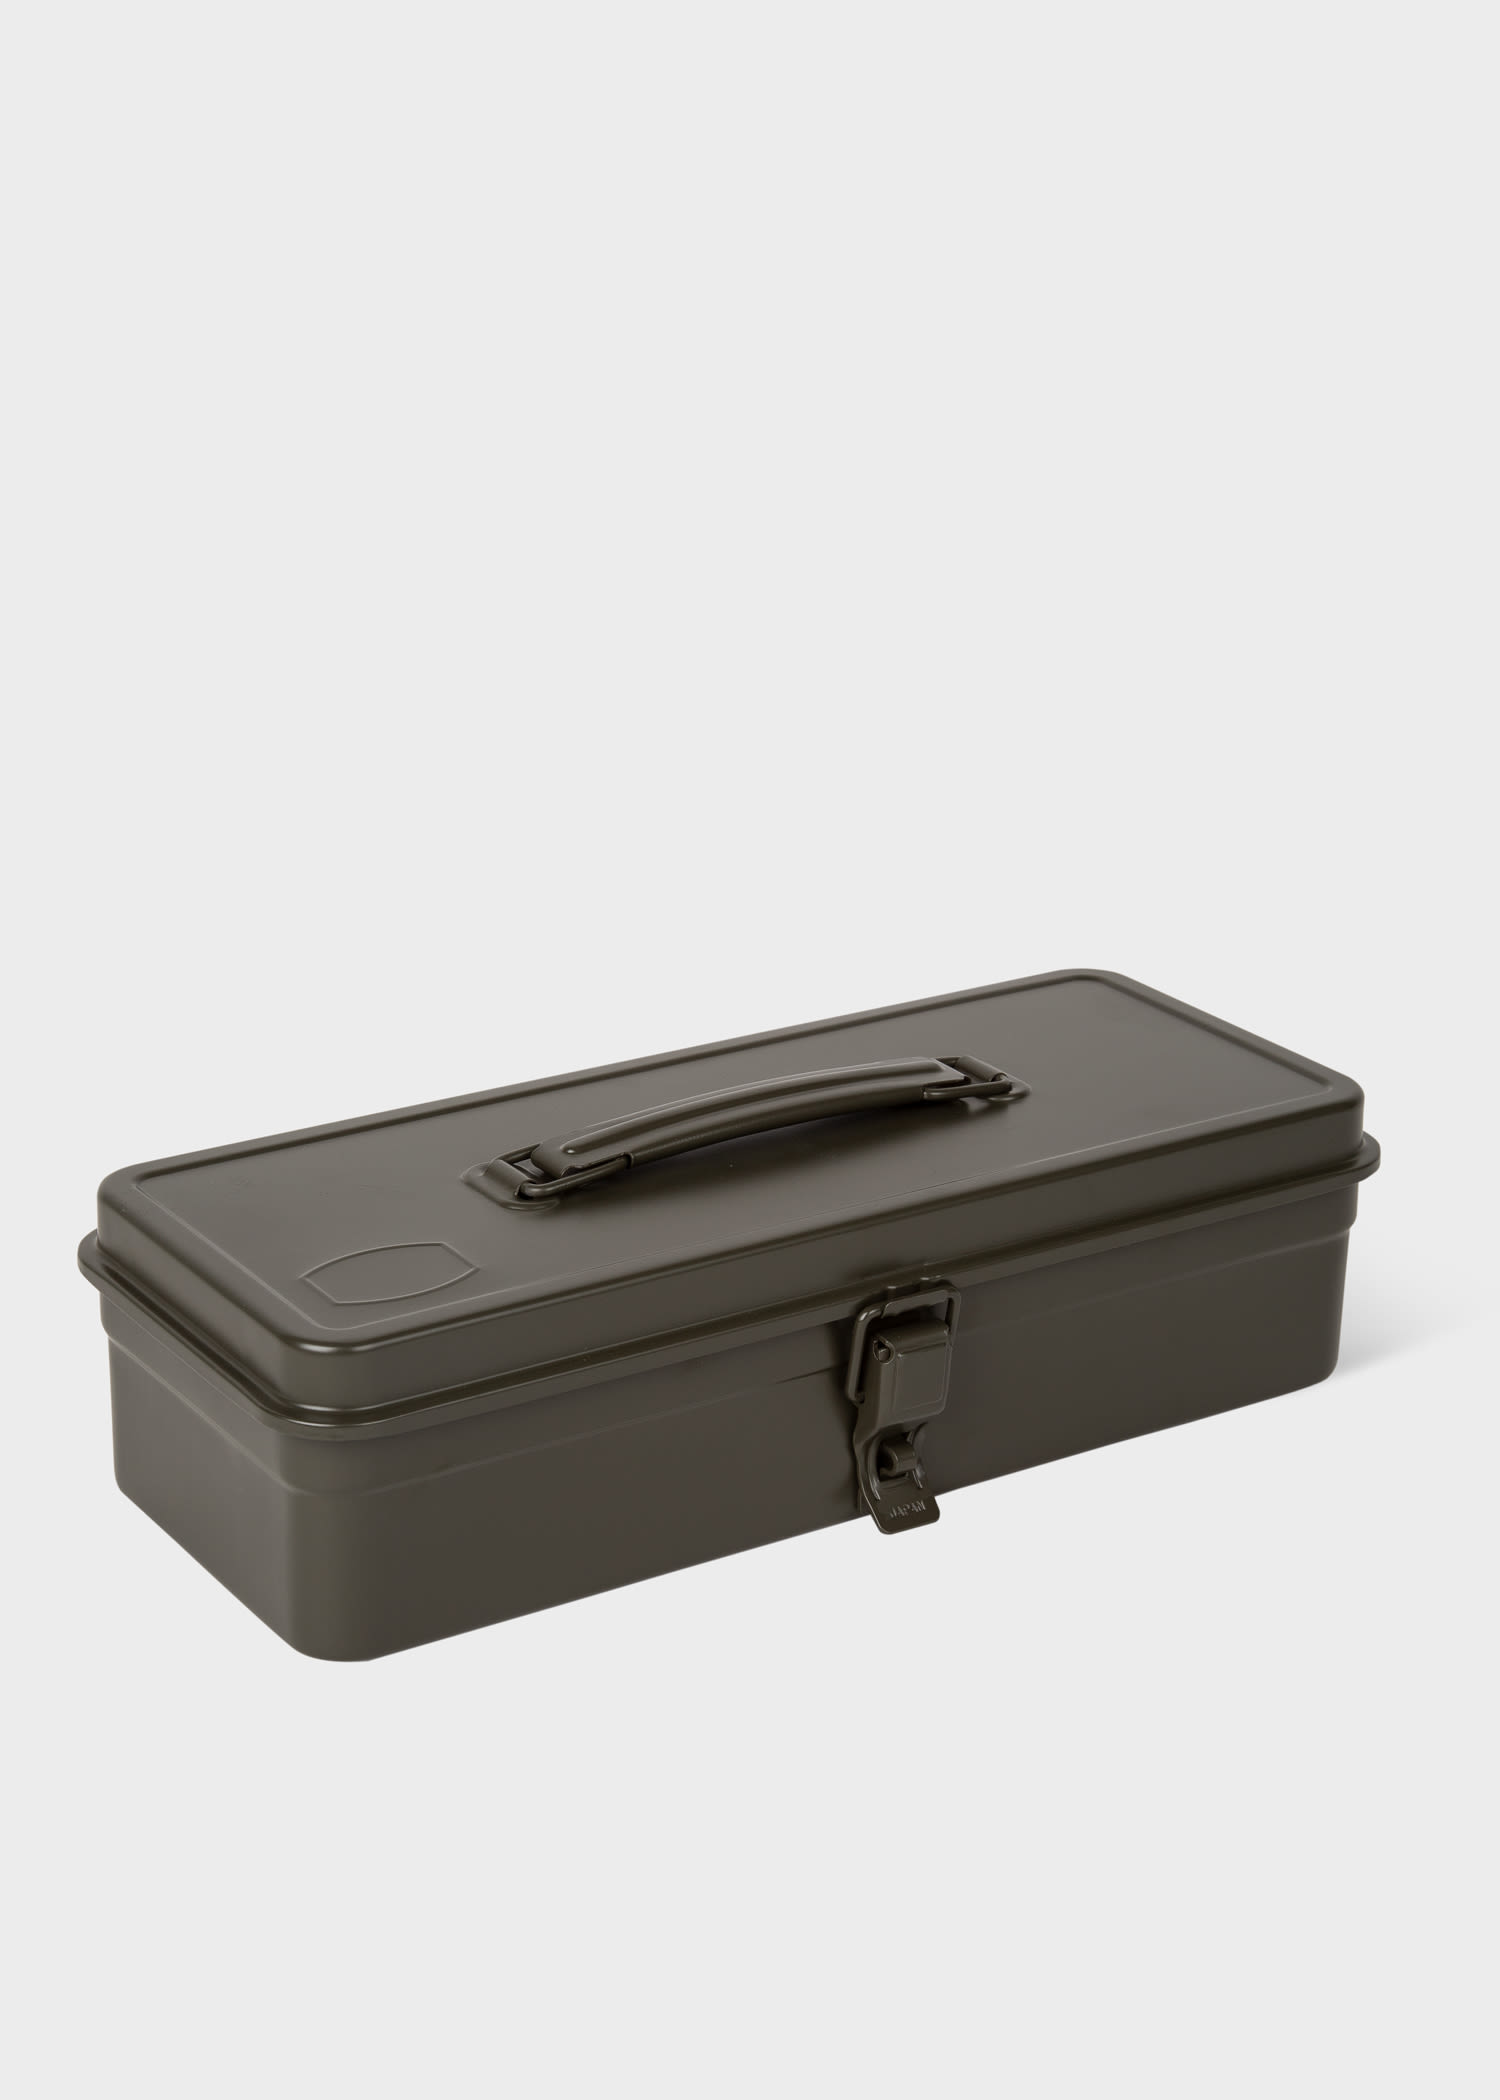 Dark Olive Green Utility Toolbox by Trusco